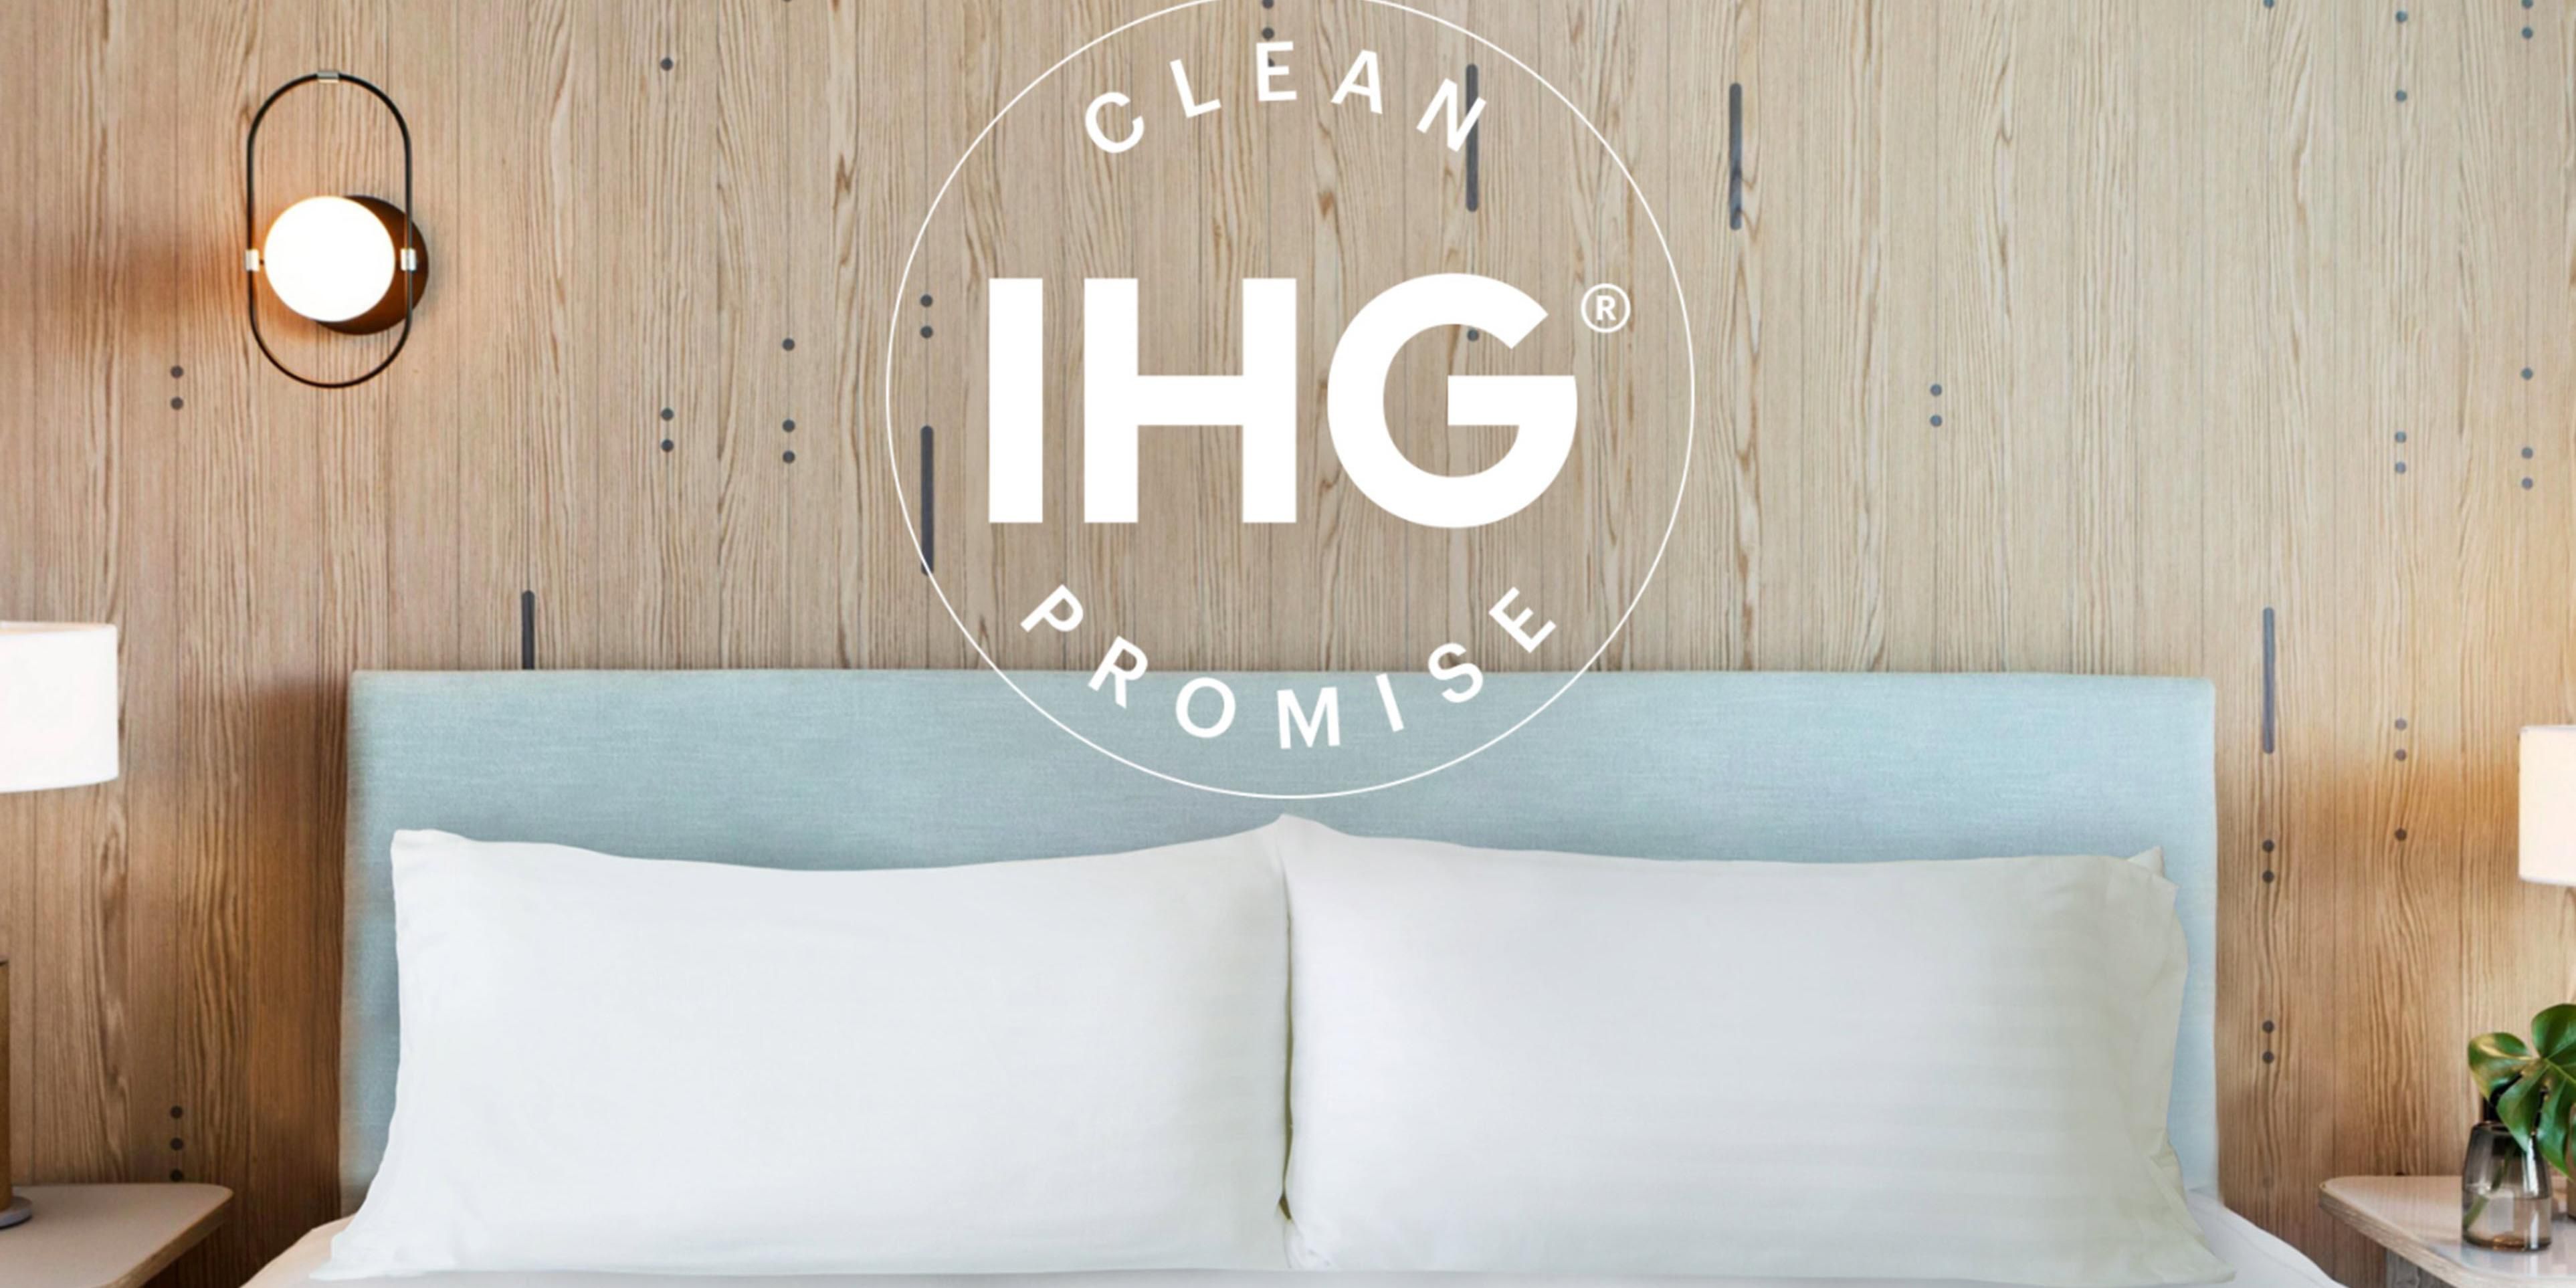 Our IHG Clean Promise includes a deep cleaning and disinfection process using science-led safety protocols and service measures to enhance guest confidence.